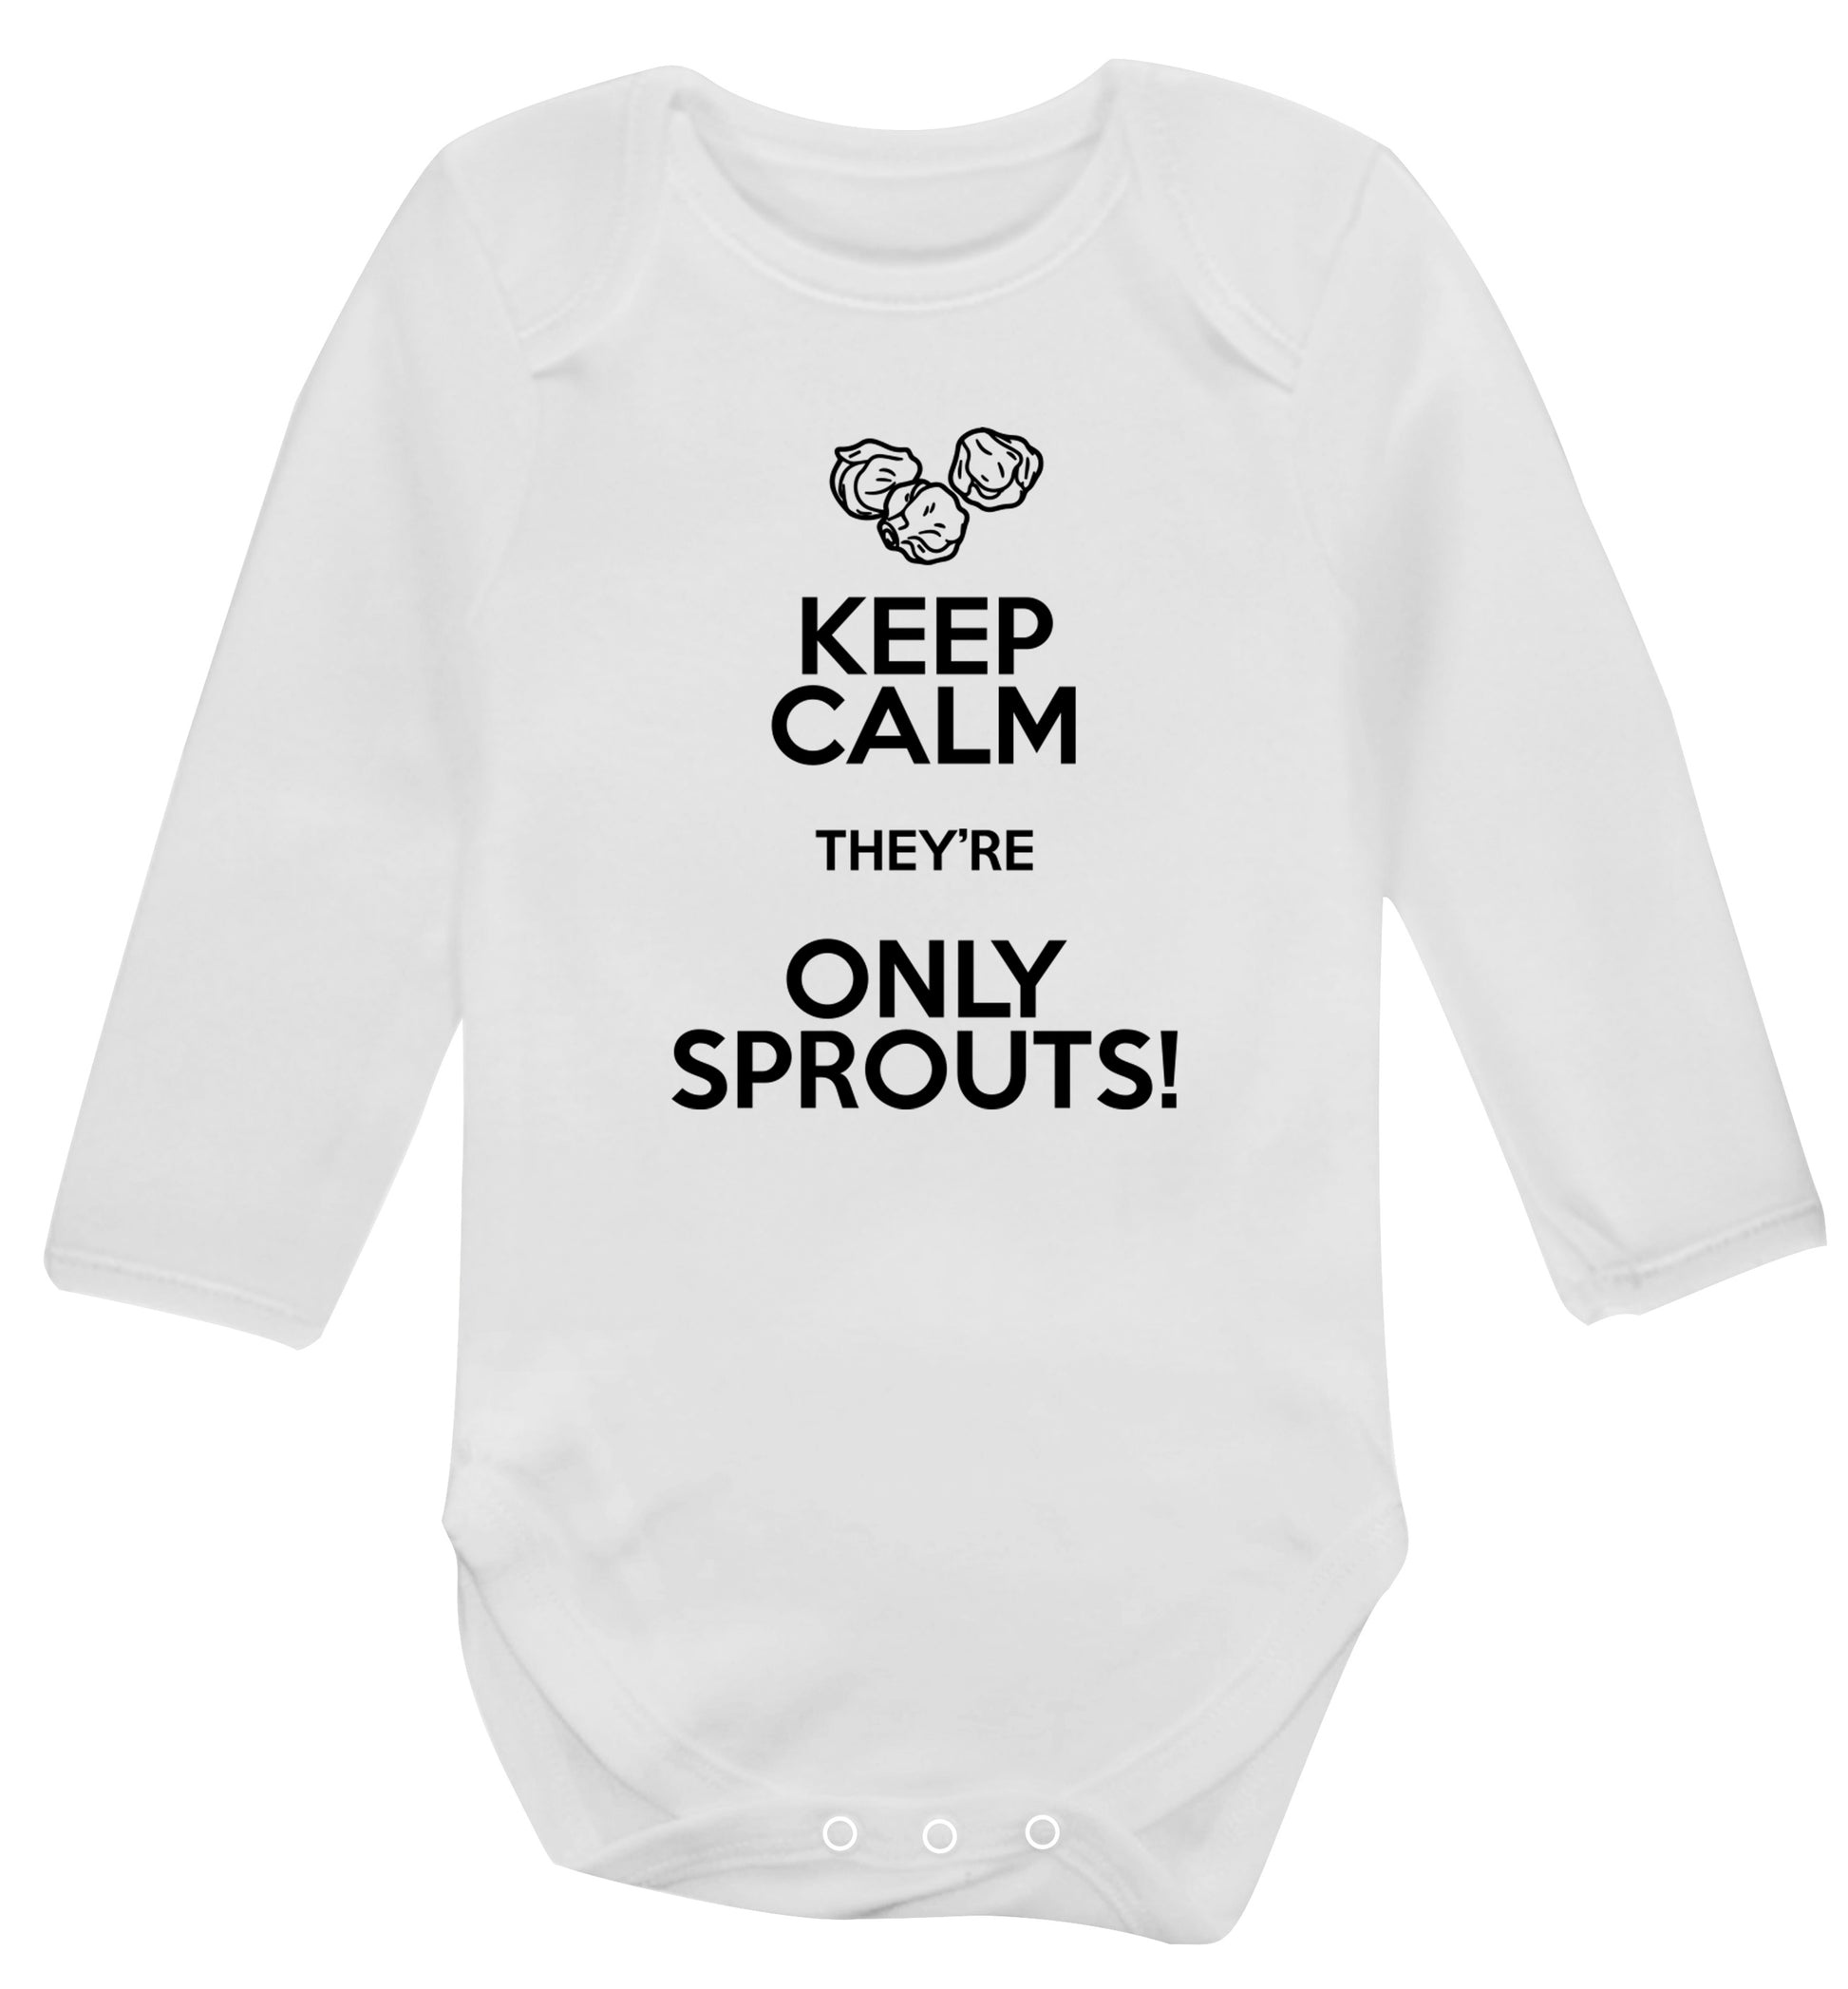 Keep calm they're only sprouts Baby Vest long sleeved white 6-12 months